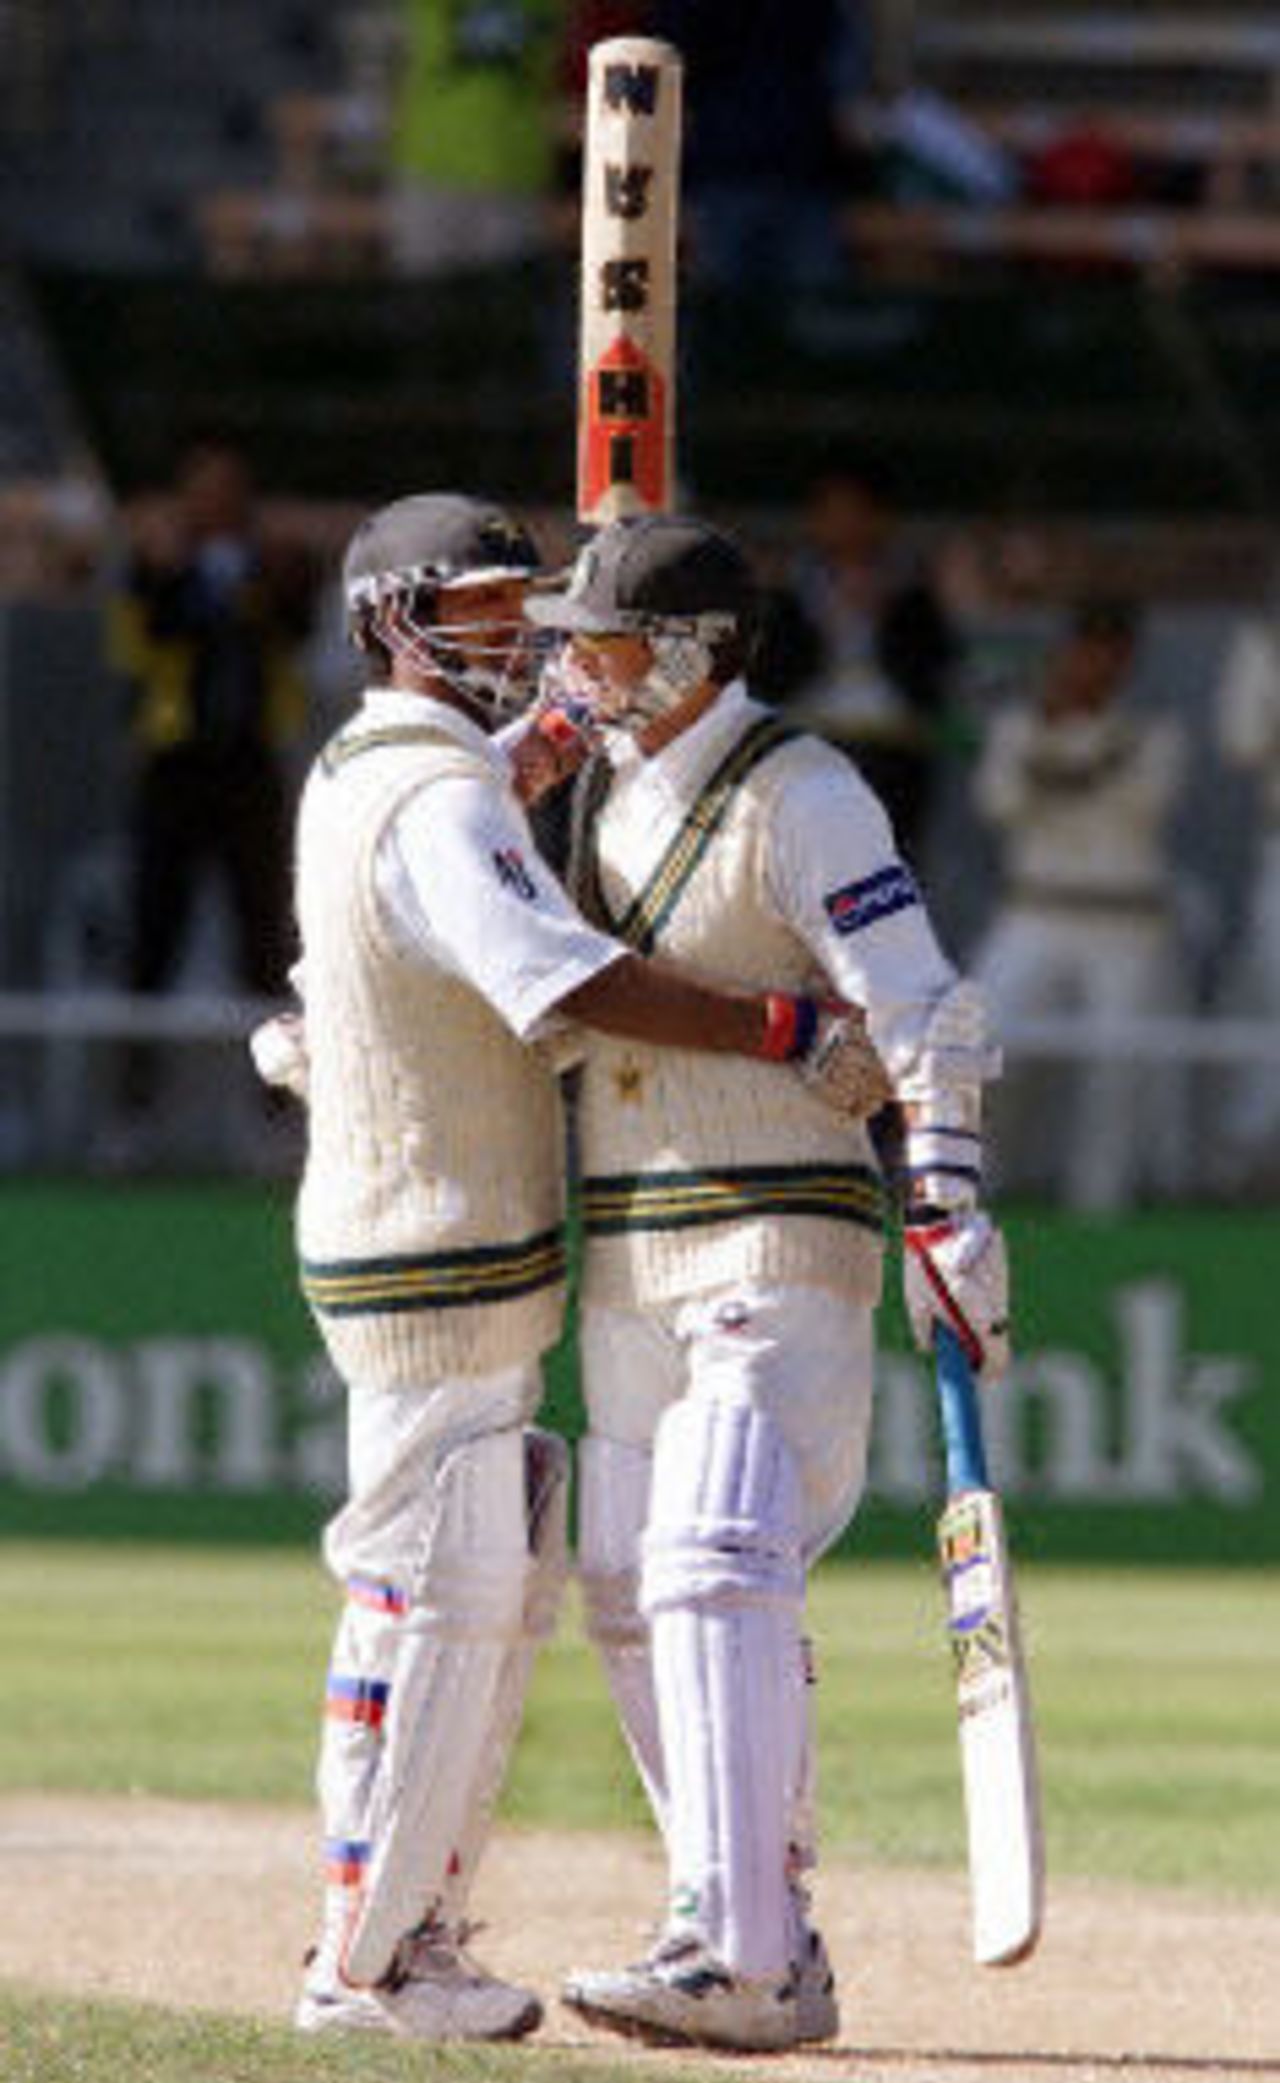 Yousuf Youhana and Saqlain Mushtaq embrace during their marathon partnership, day 4, 2nd Test at Christchurch, 15-19 March 2001.